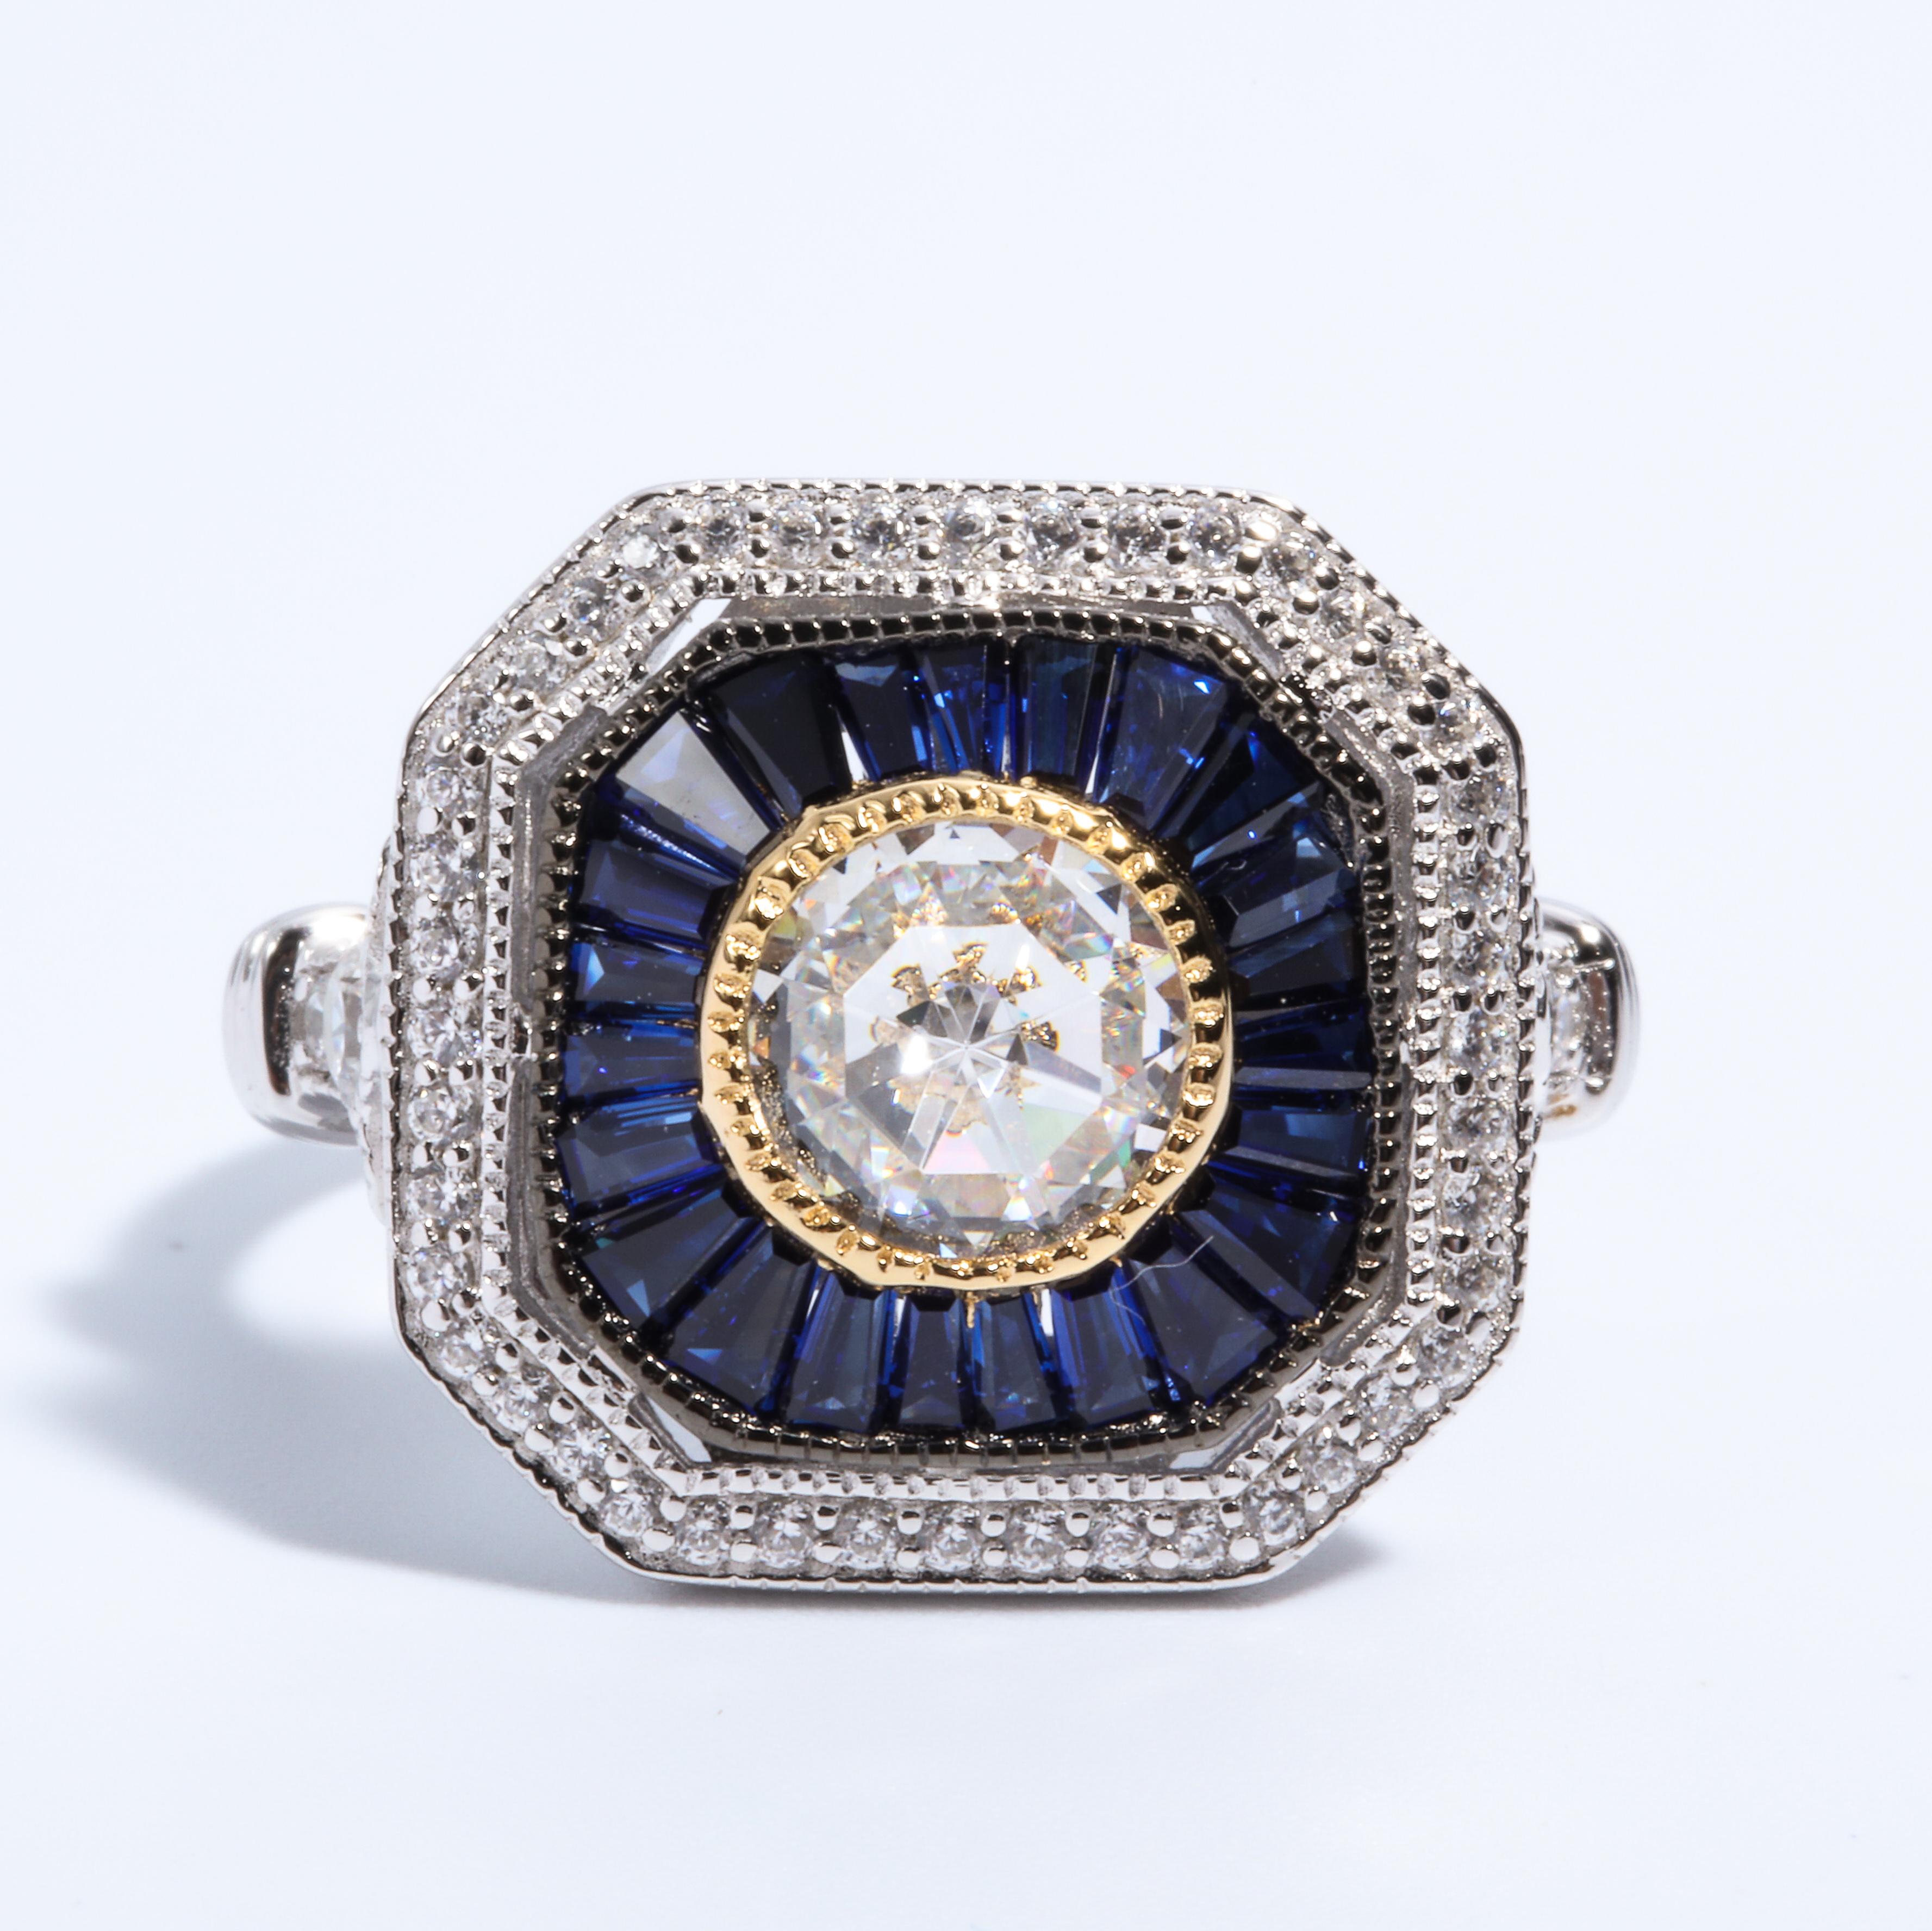 Magnificent Costume Jewelry Art Deco Style Diamond Sapphire Sterling Ring set with a Round CZ Surrounded by Tapered Faux Baguette Sapphires set in non-tarnish Sterling free sizing.